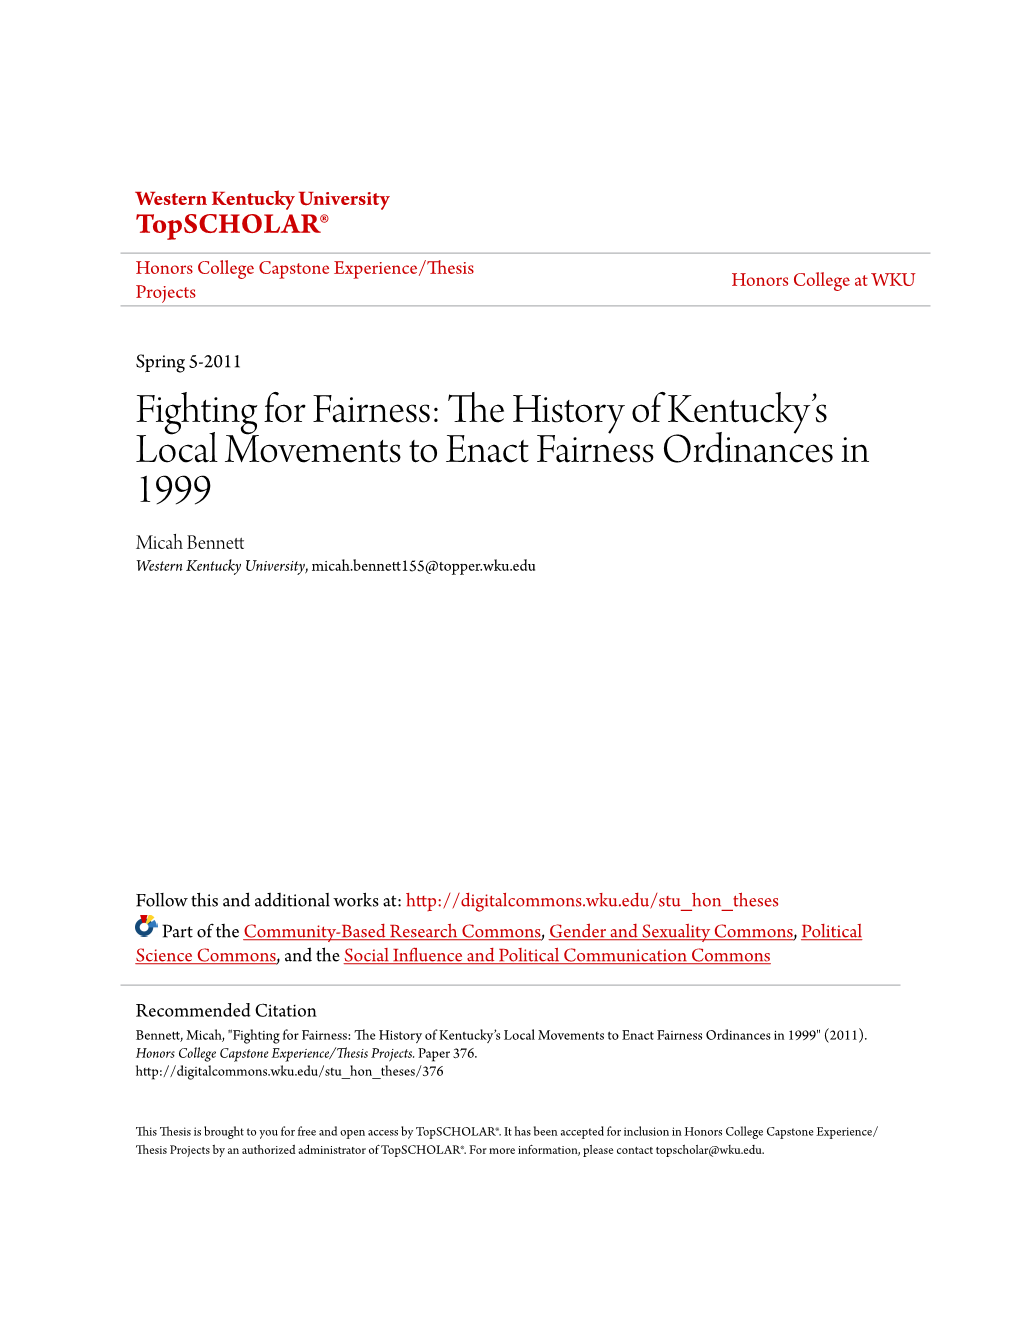 Fighting for Fairness: the History of Kentucky's Local Movements to Enact Fairness Ordinances in 1999